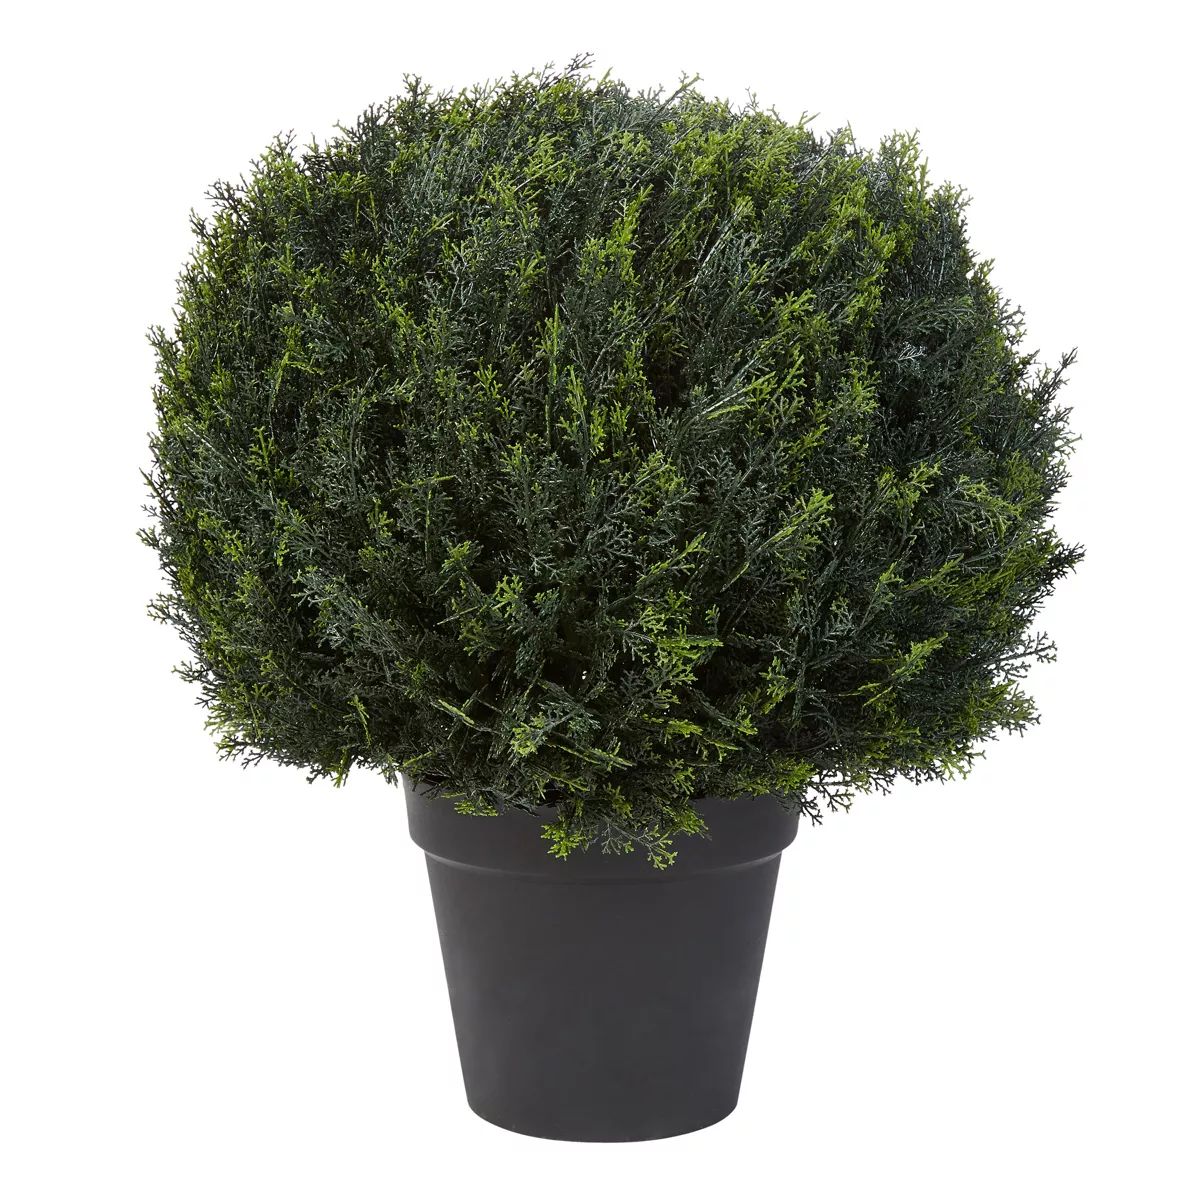 Pure Garden Artificial Cypress Topiary, Tower Style Faux Plant in Sturdy Pot | Target